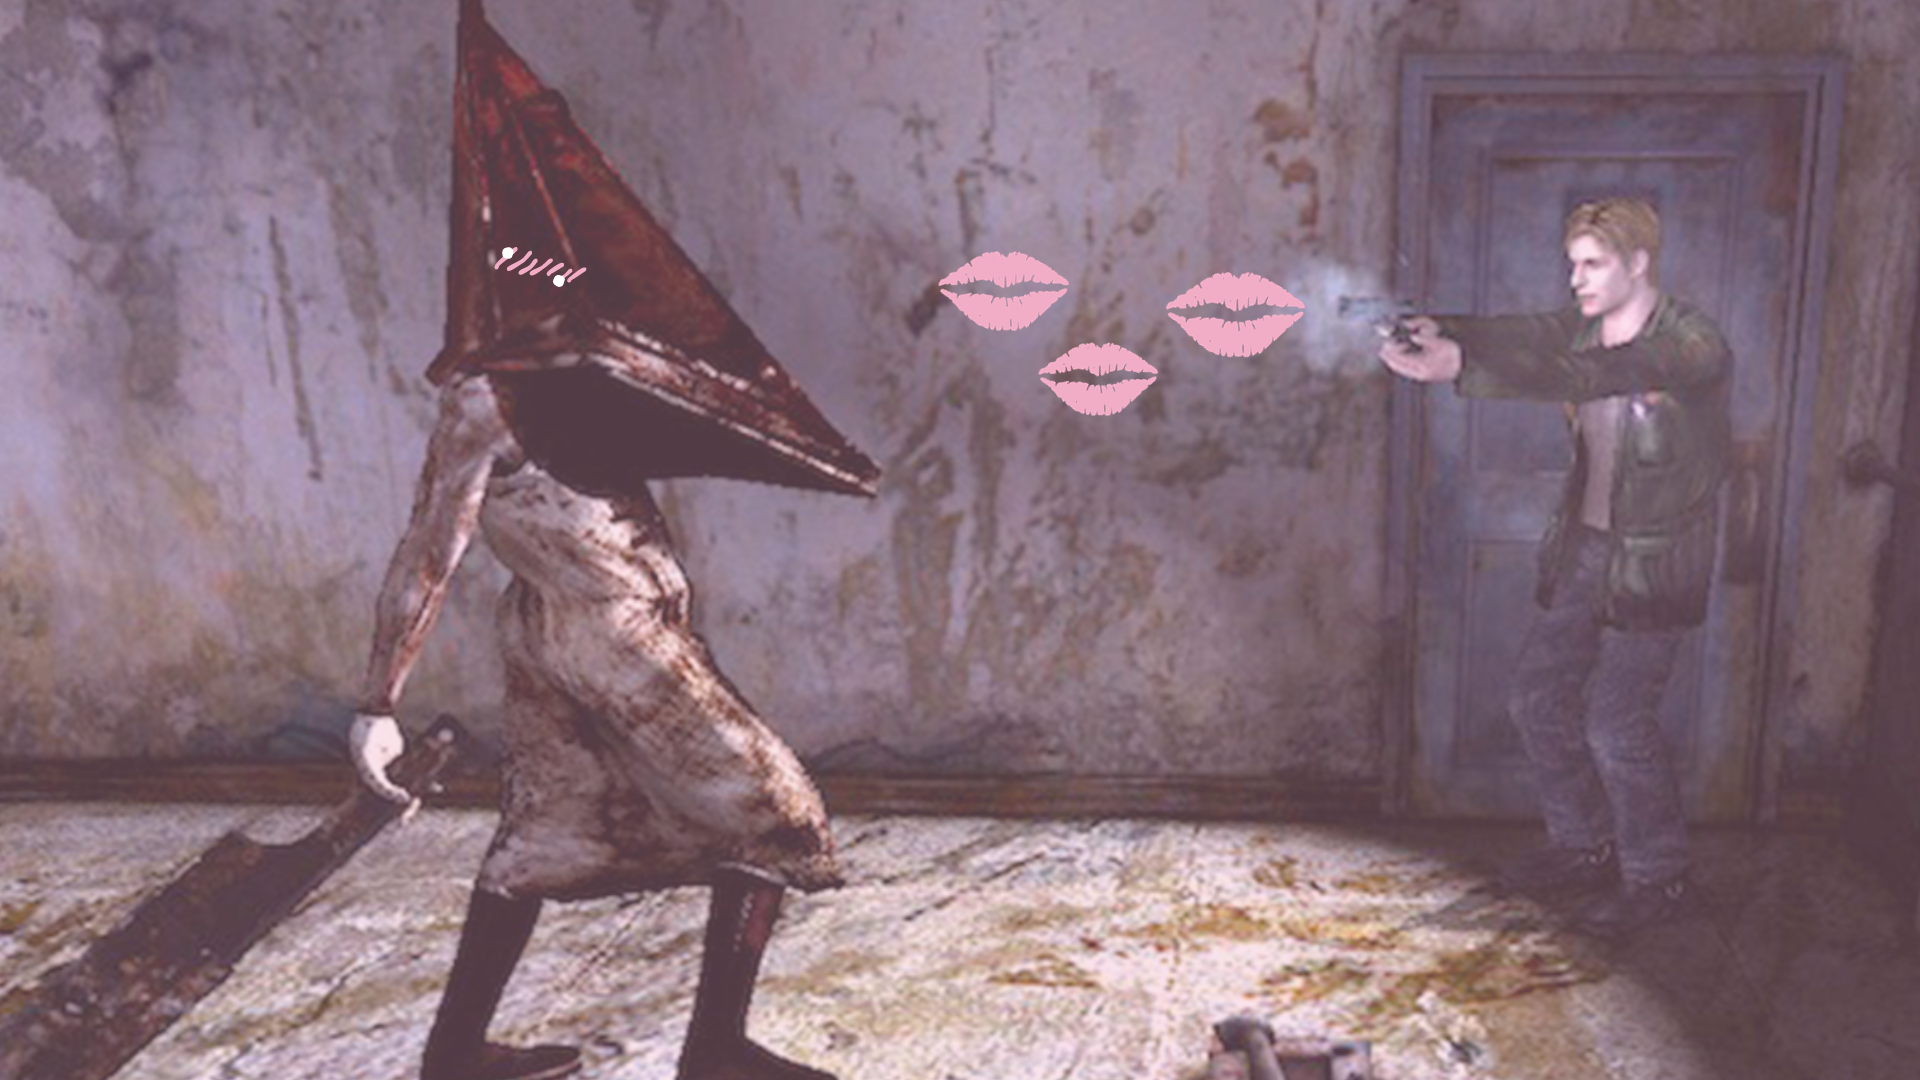 A New SILENT HILL Movie In 2023? Maybe!